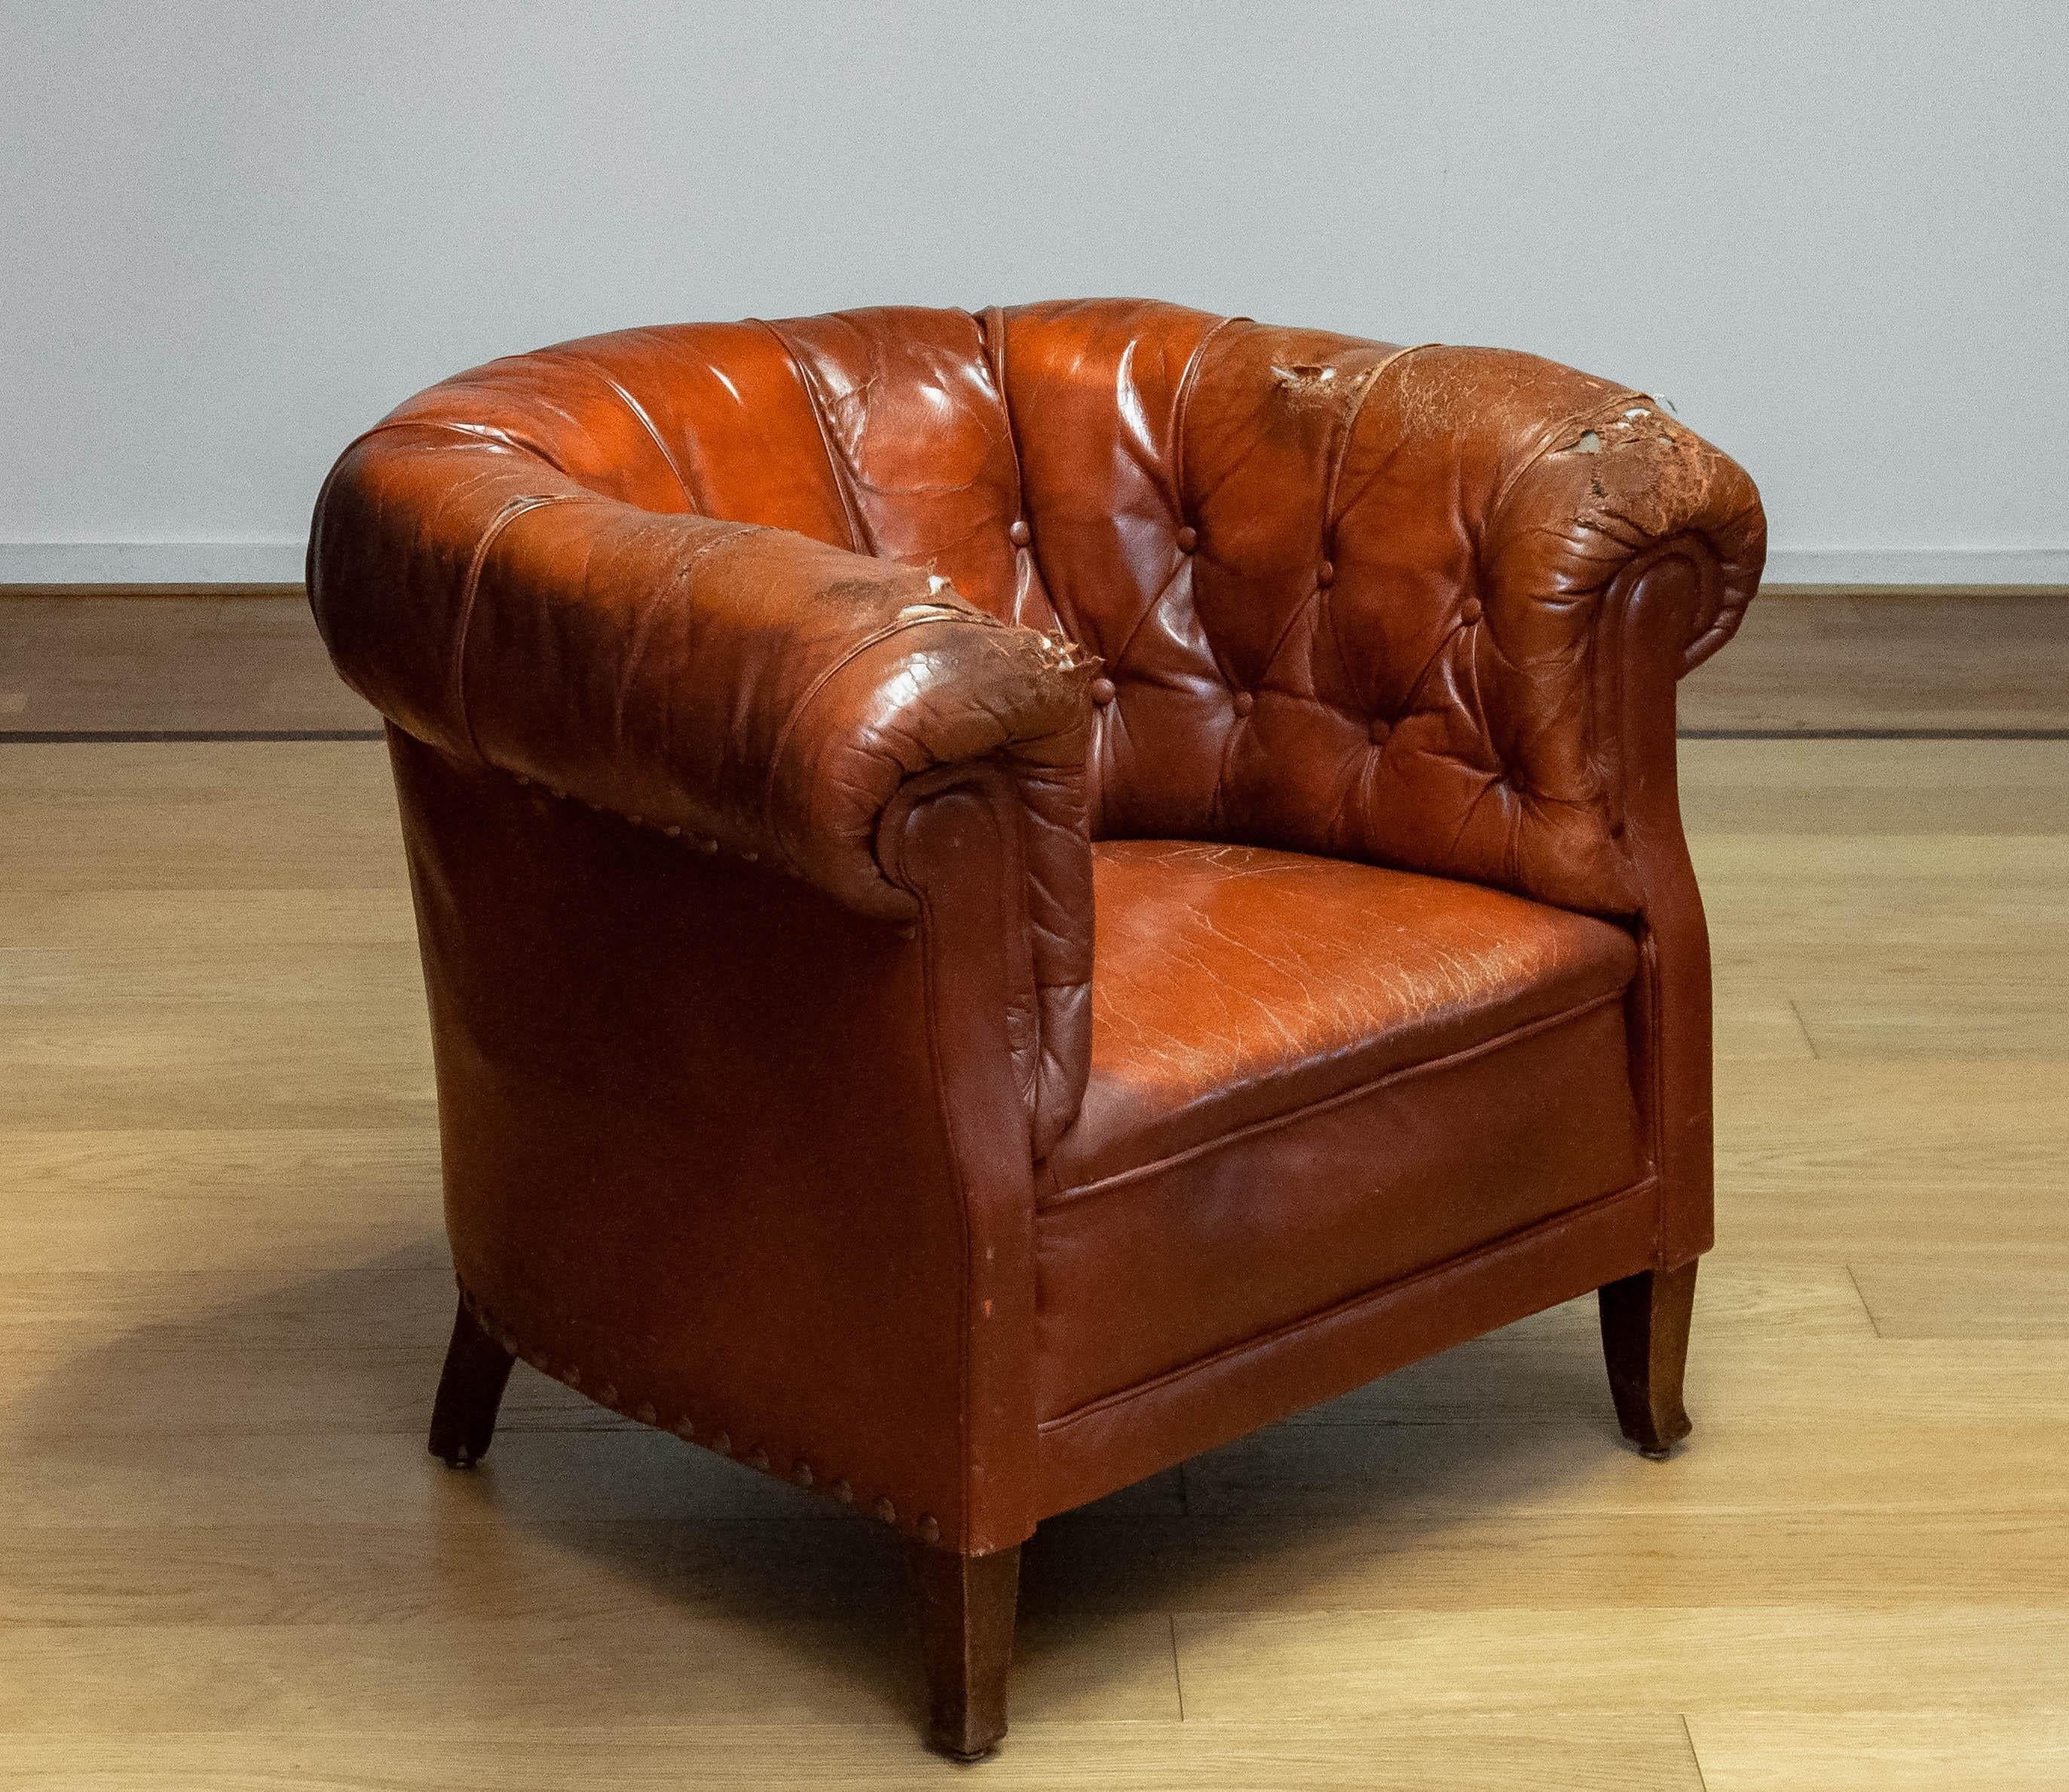 1940s Swedish Tufted Club Chair 'Chesterfield Model' In Tan Brown Worn Leather 1